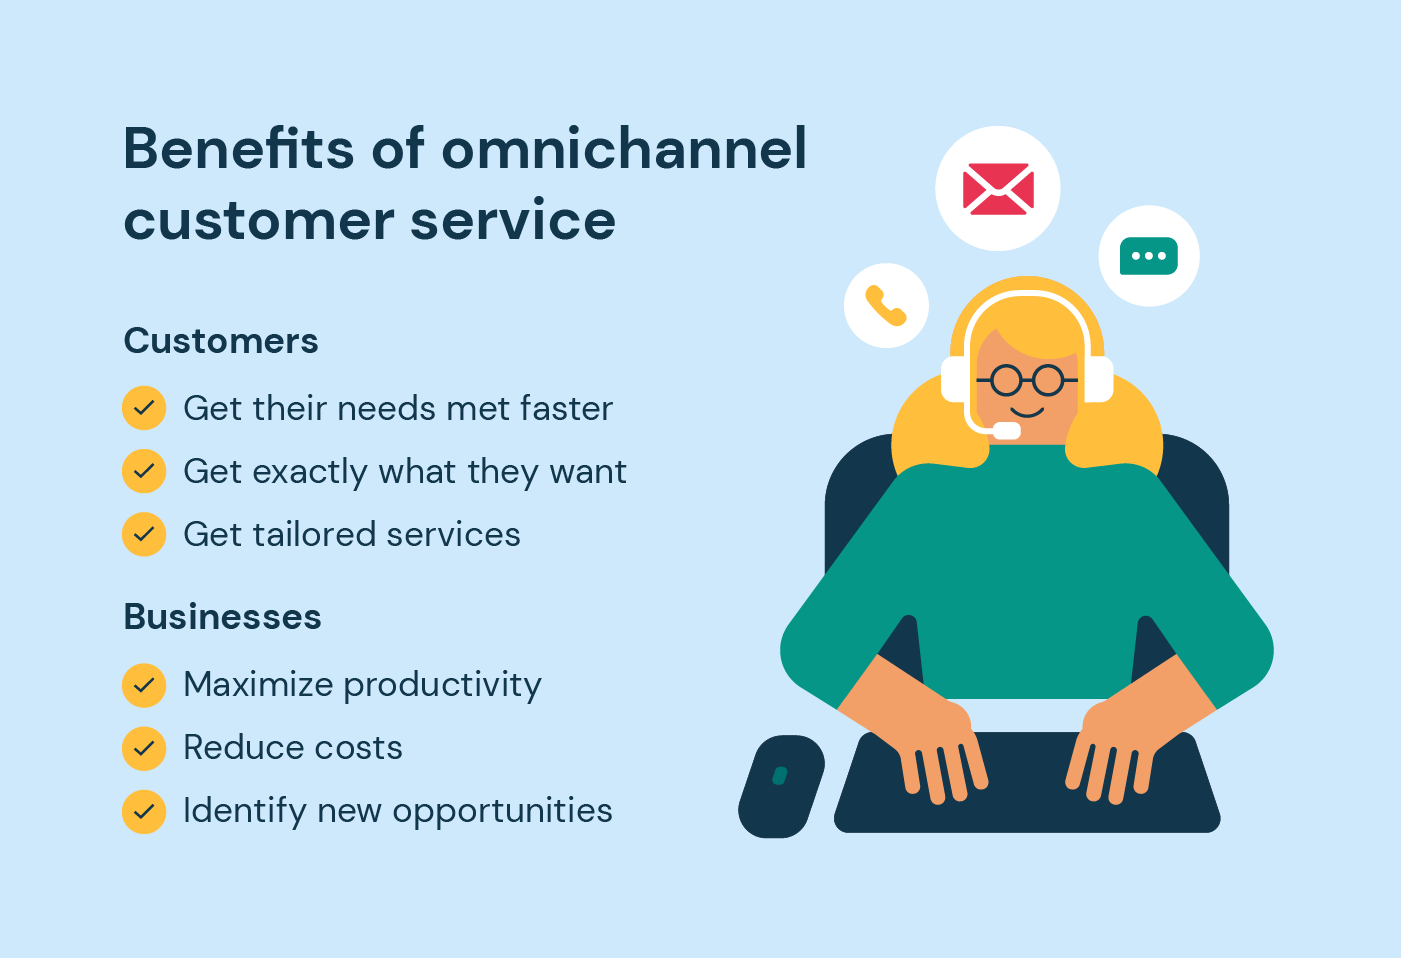 Illustration shows how omnichannel customer service benefits customers and businesses